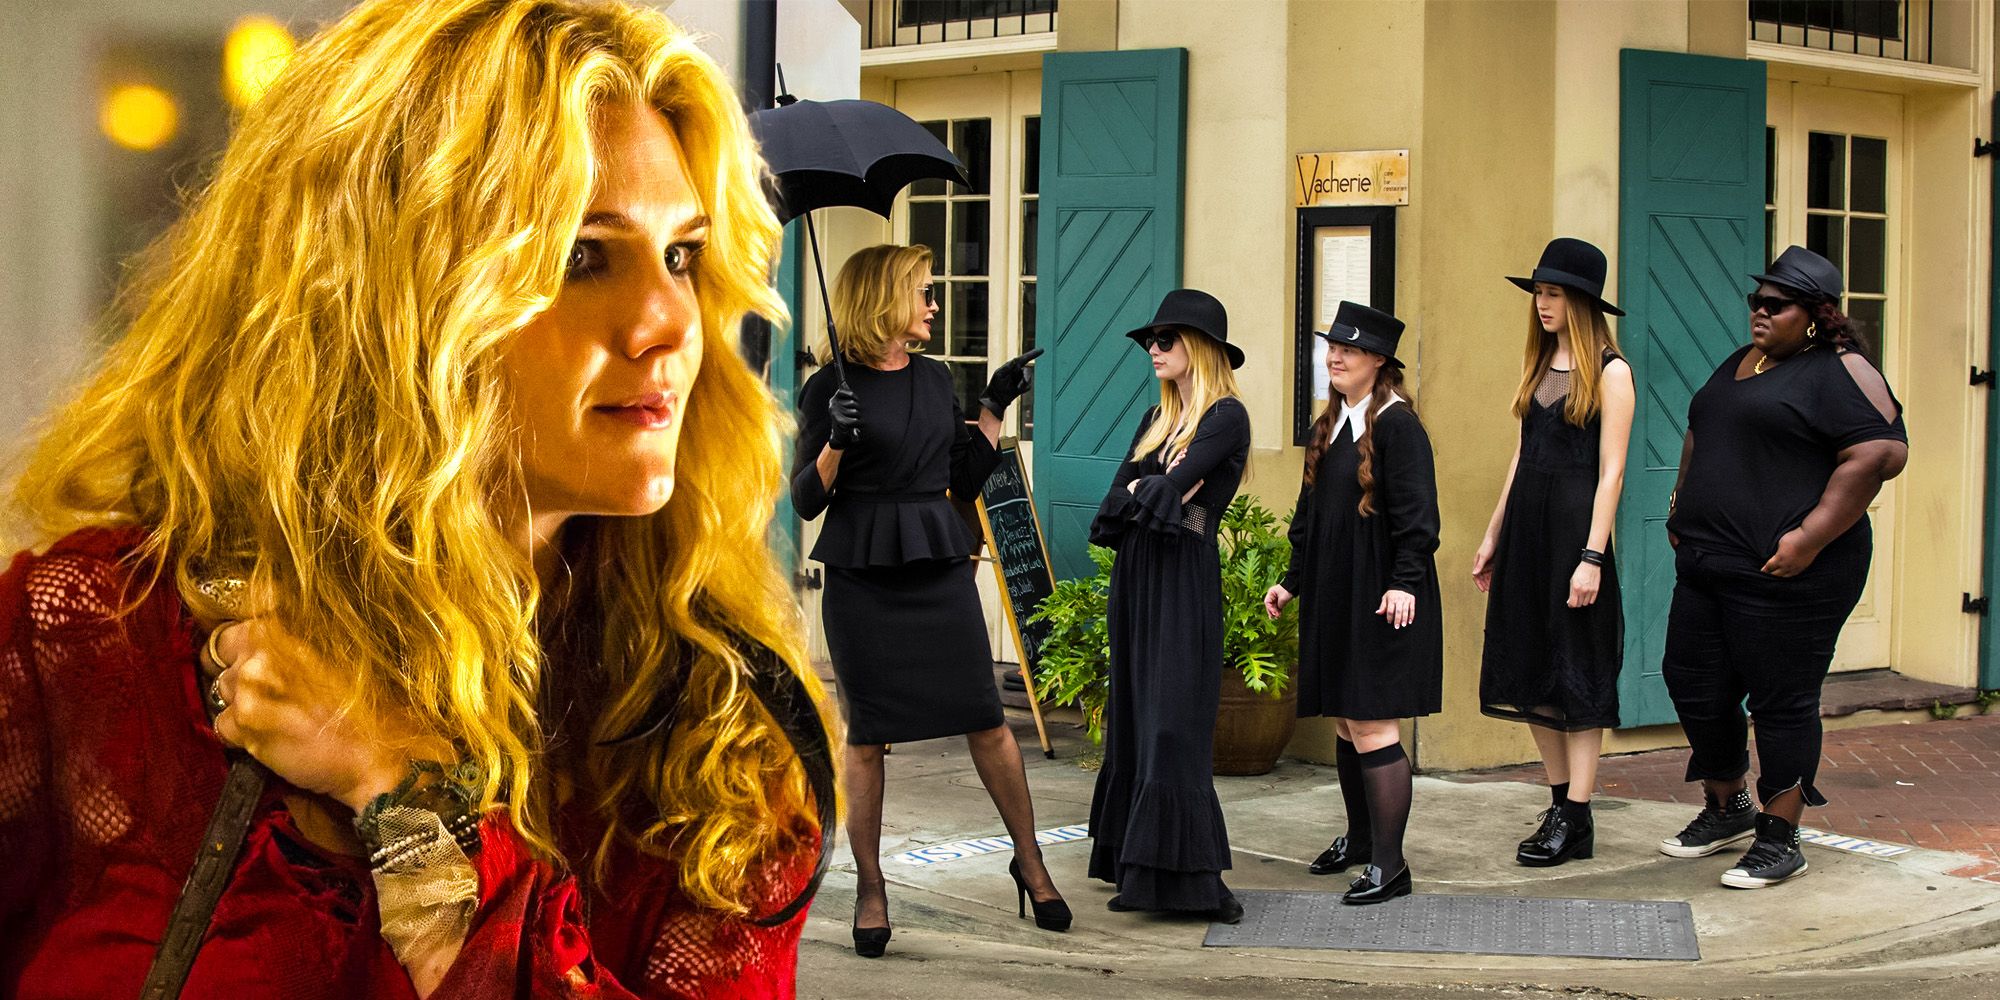 American horror story Coven powers of each main character